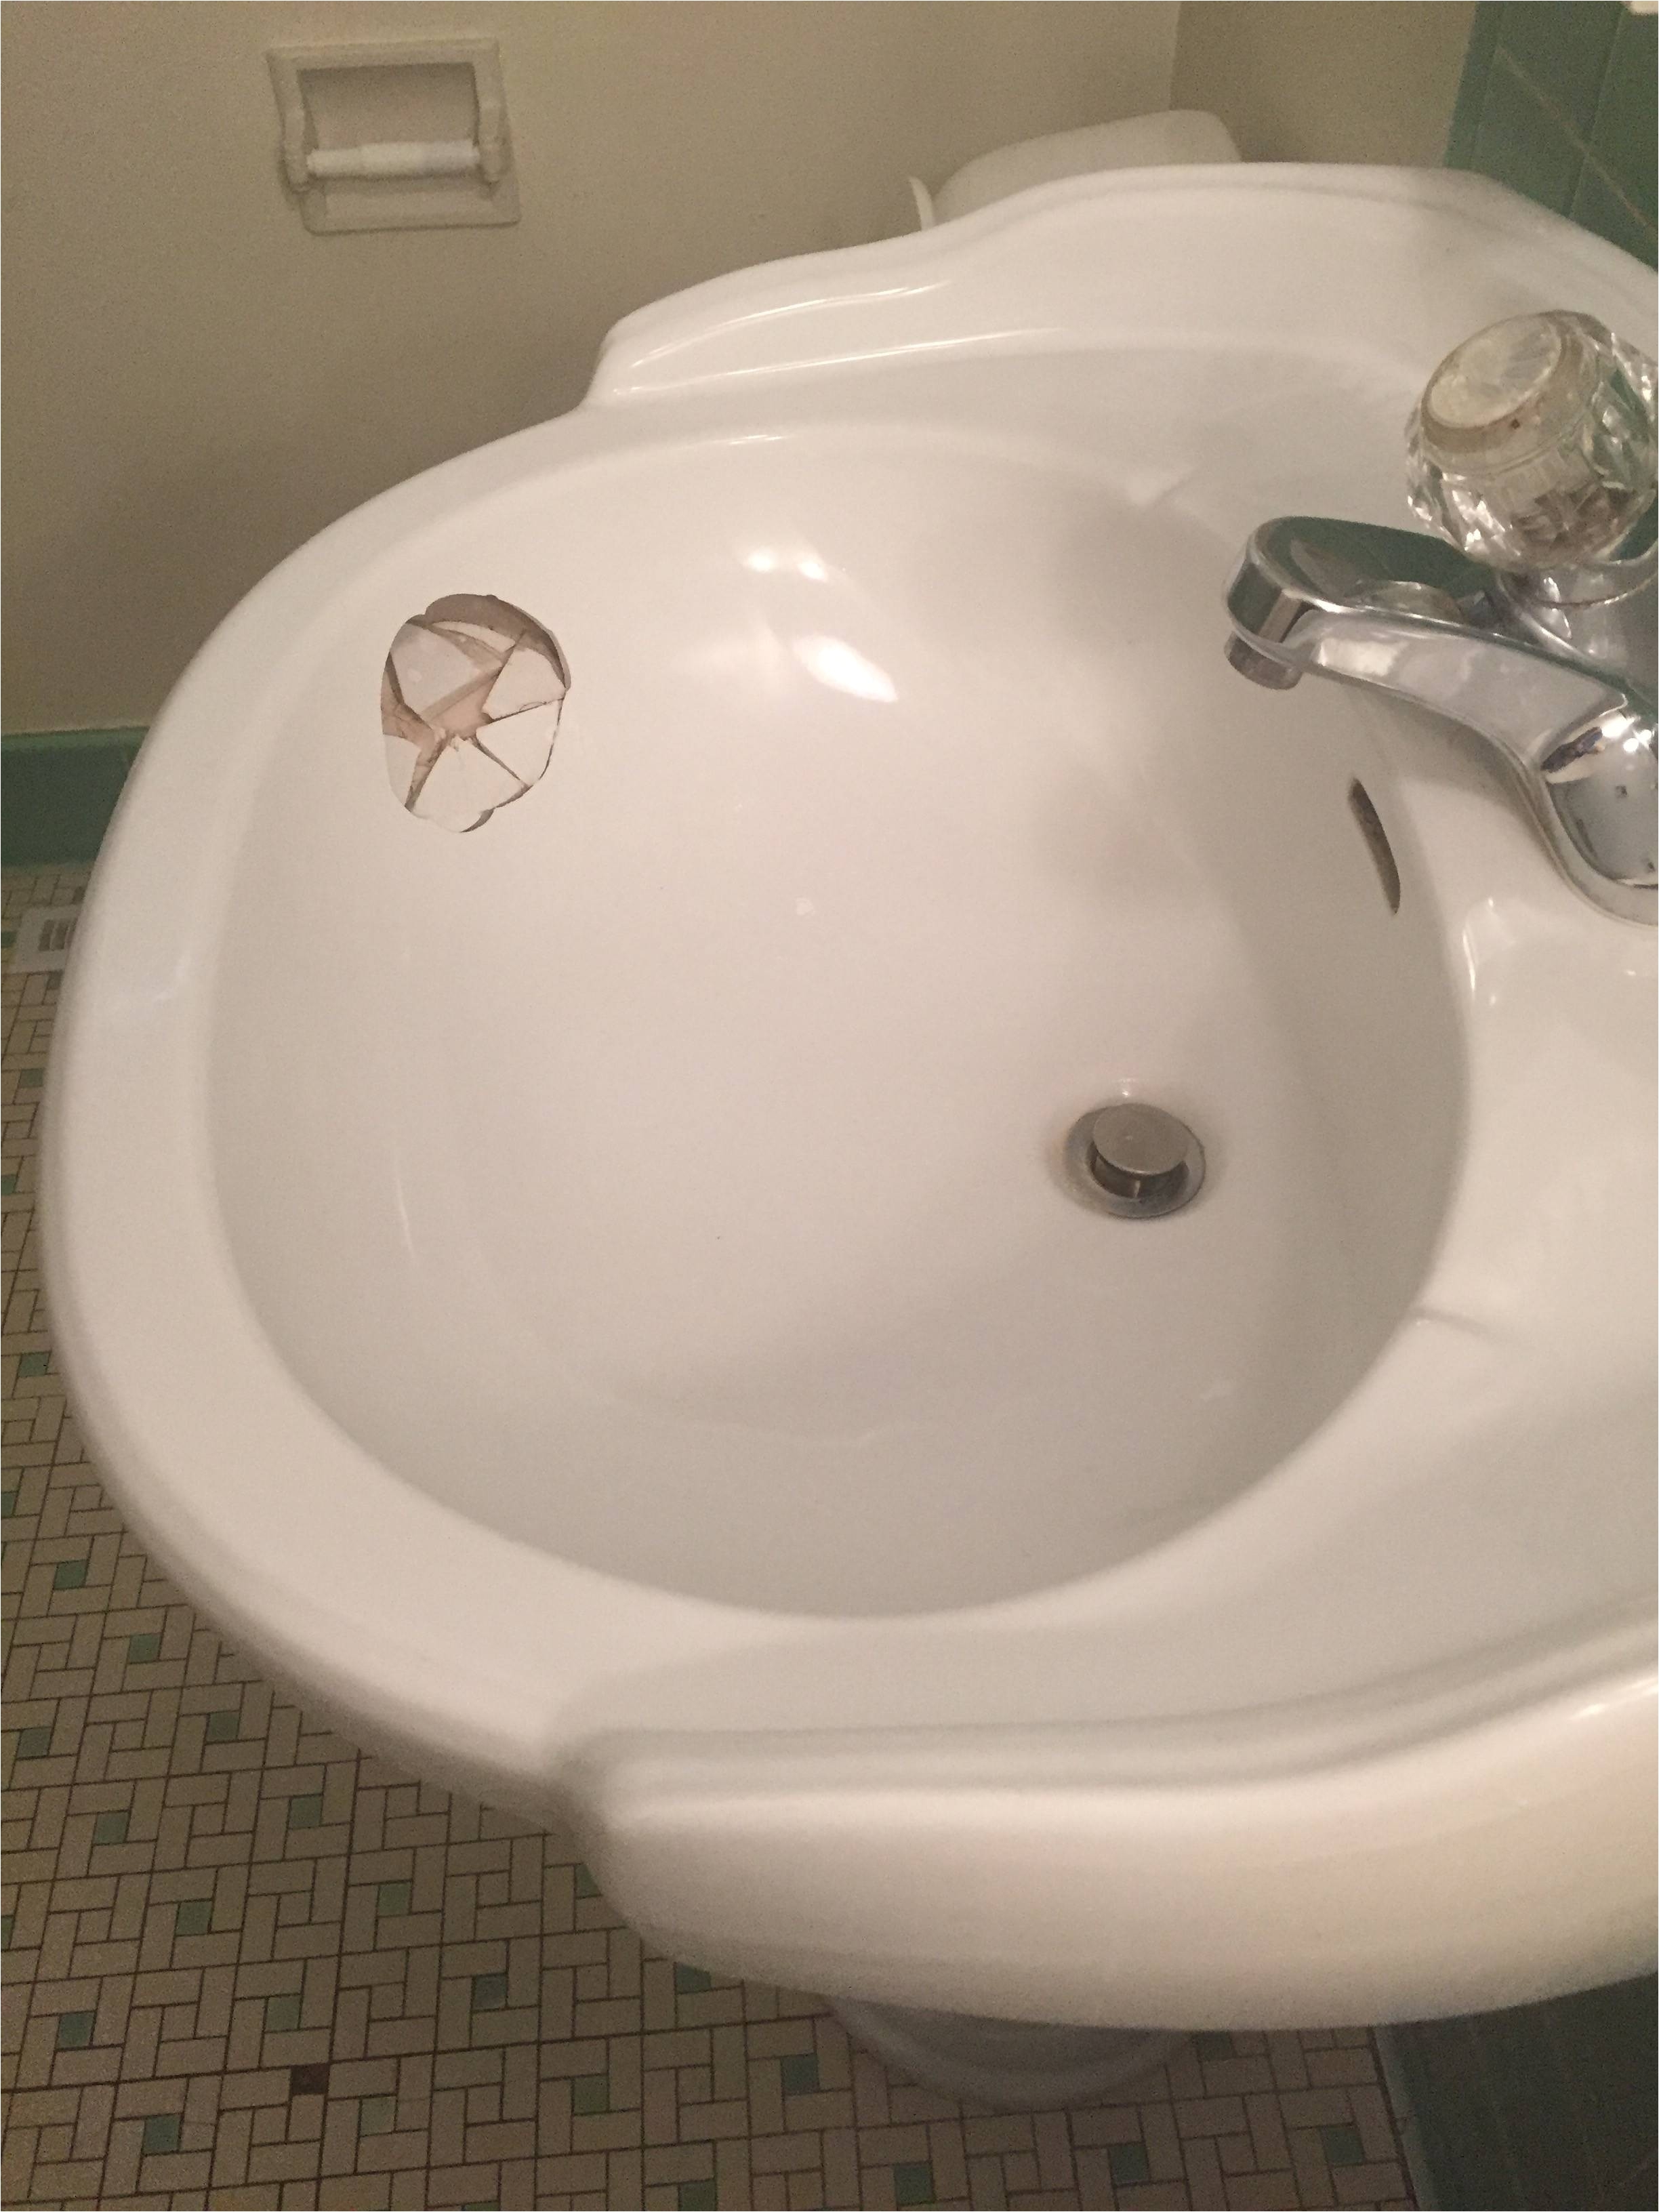 how to open a clogged bathroom sink drain new bathroom sink not draining new h sink